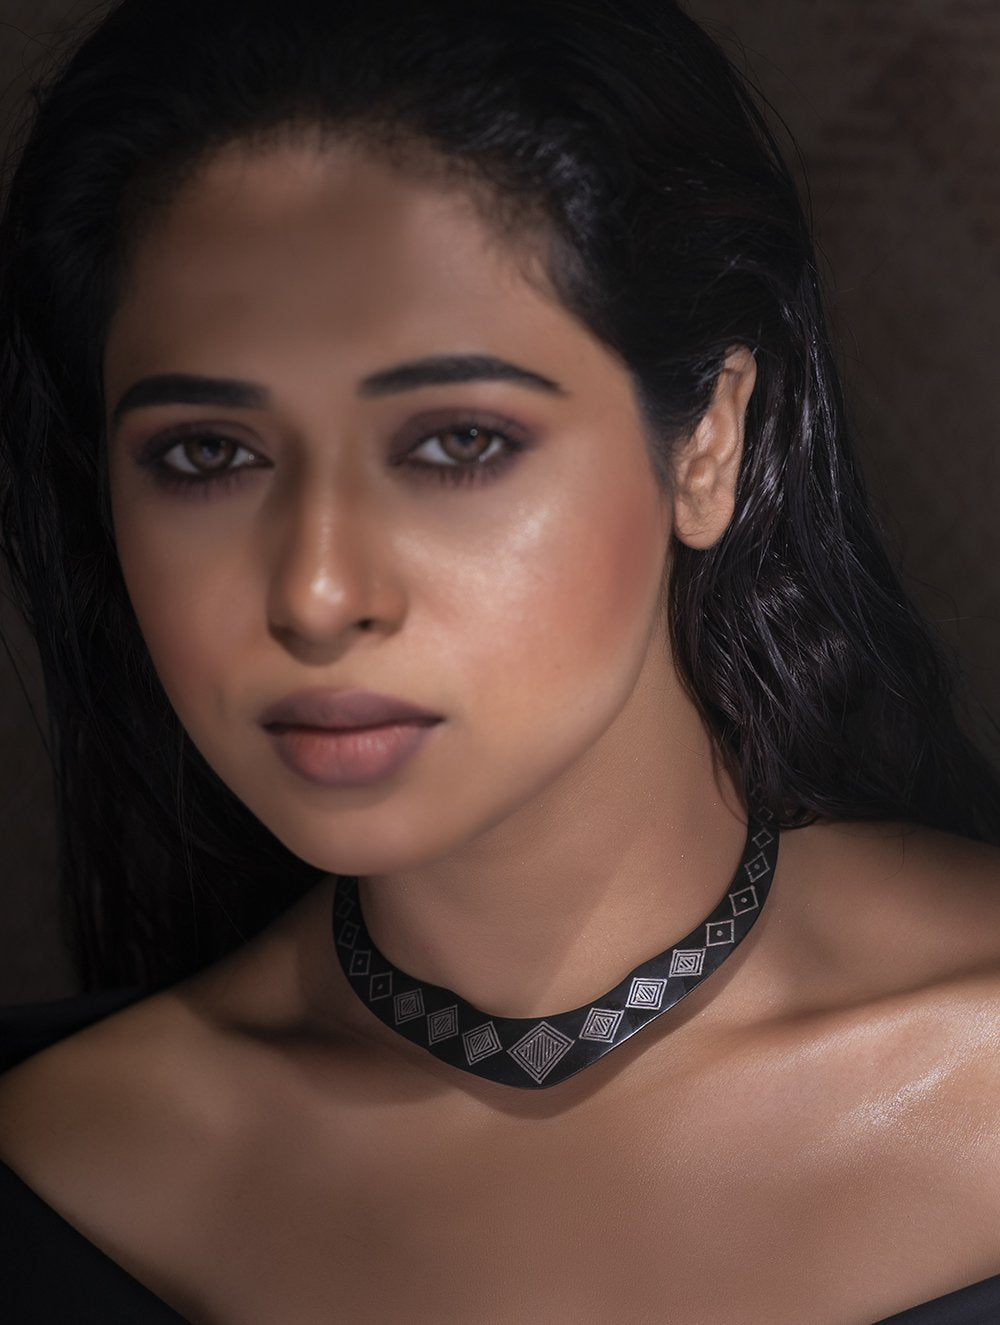 Load image into Gallery viewer, Exclusive Bidri Craft Choker With Pure Silver Inlay - Diamond Patterns